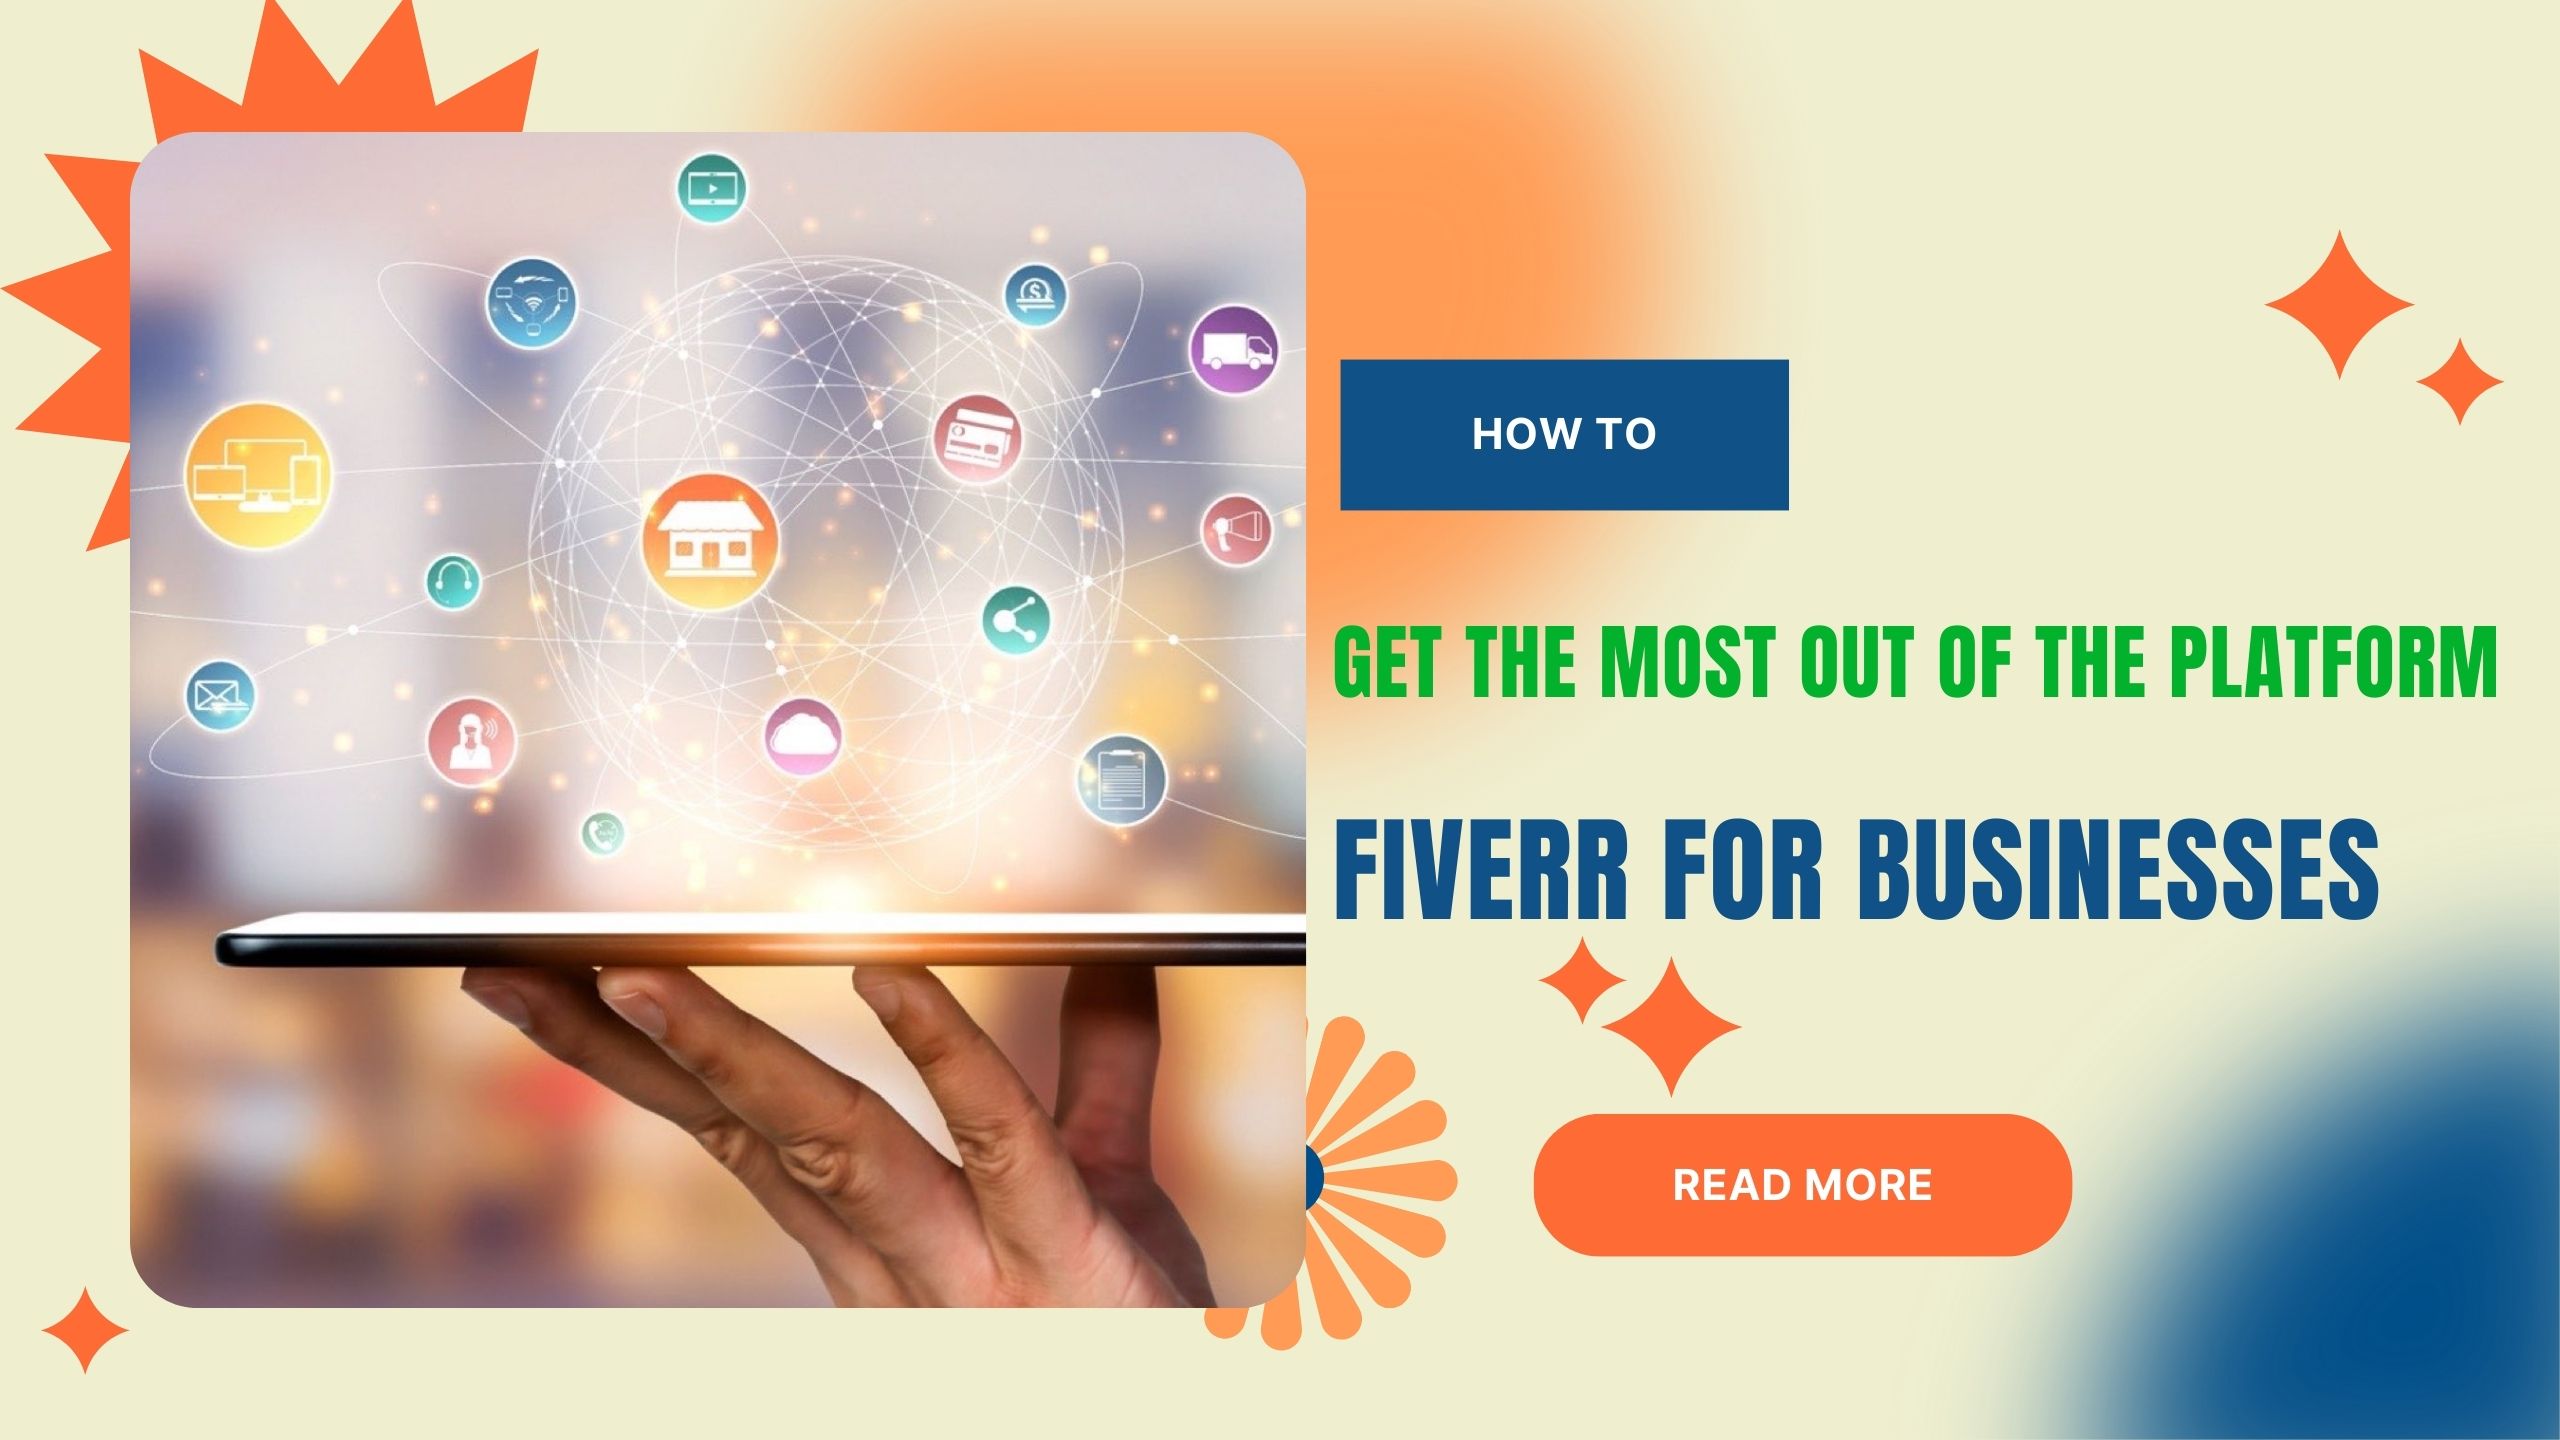 Fiverr for Businesses: How to Get the Most Out of the Platform